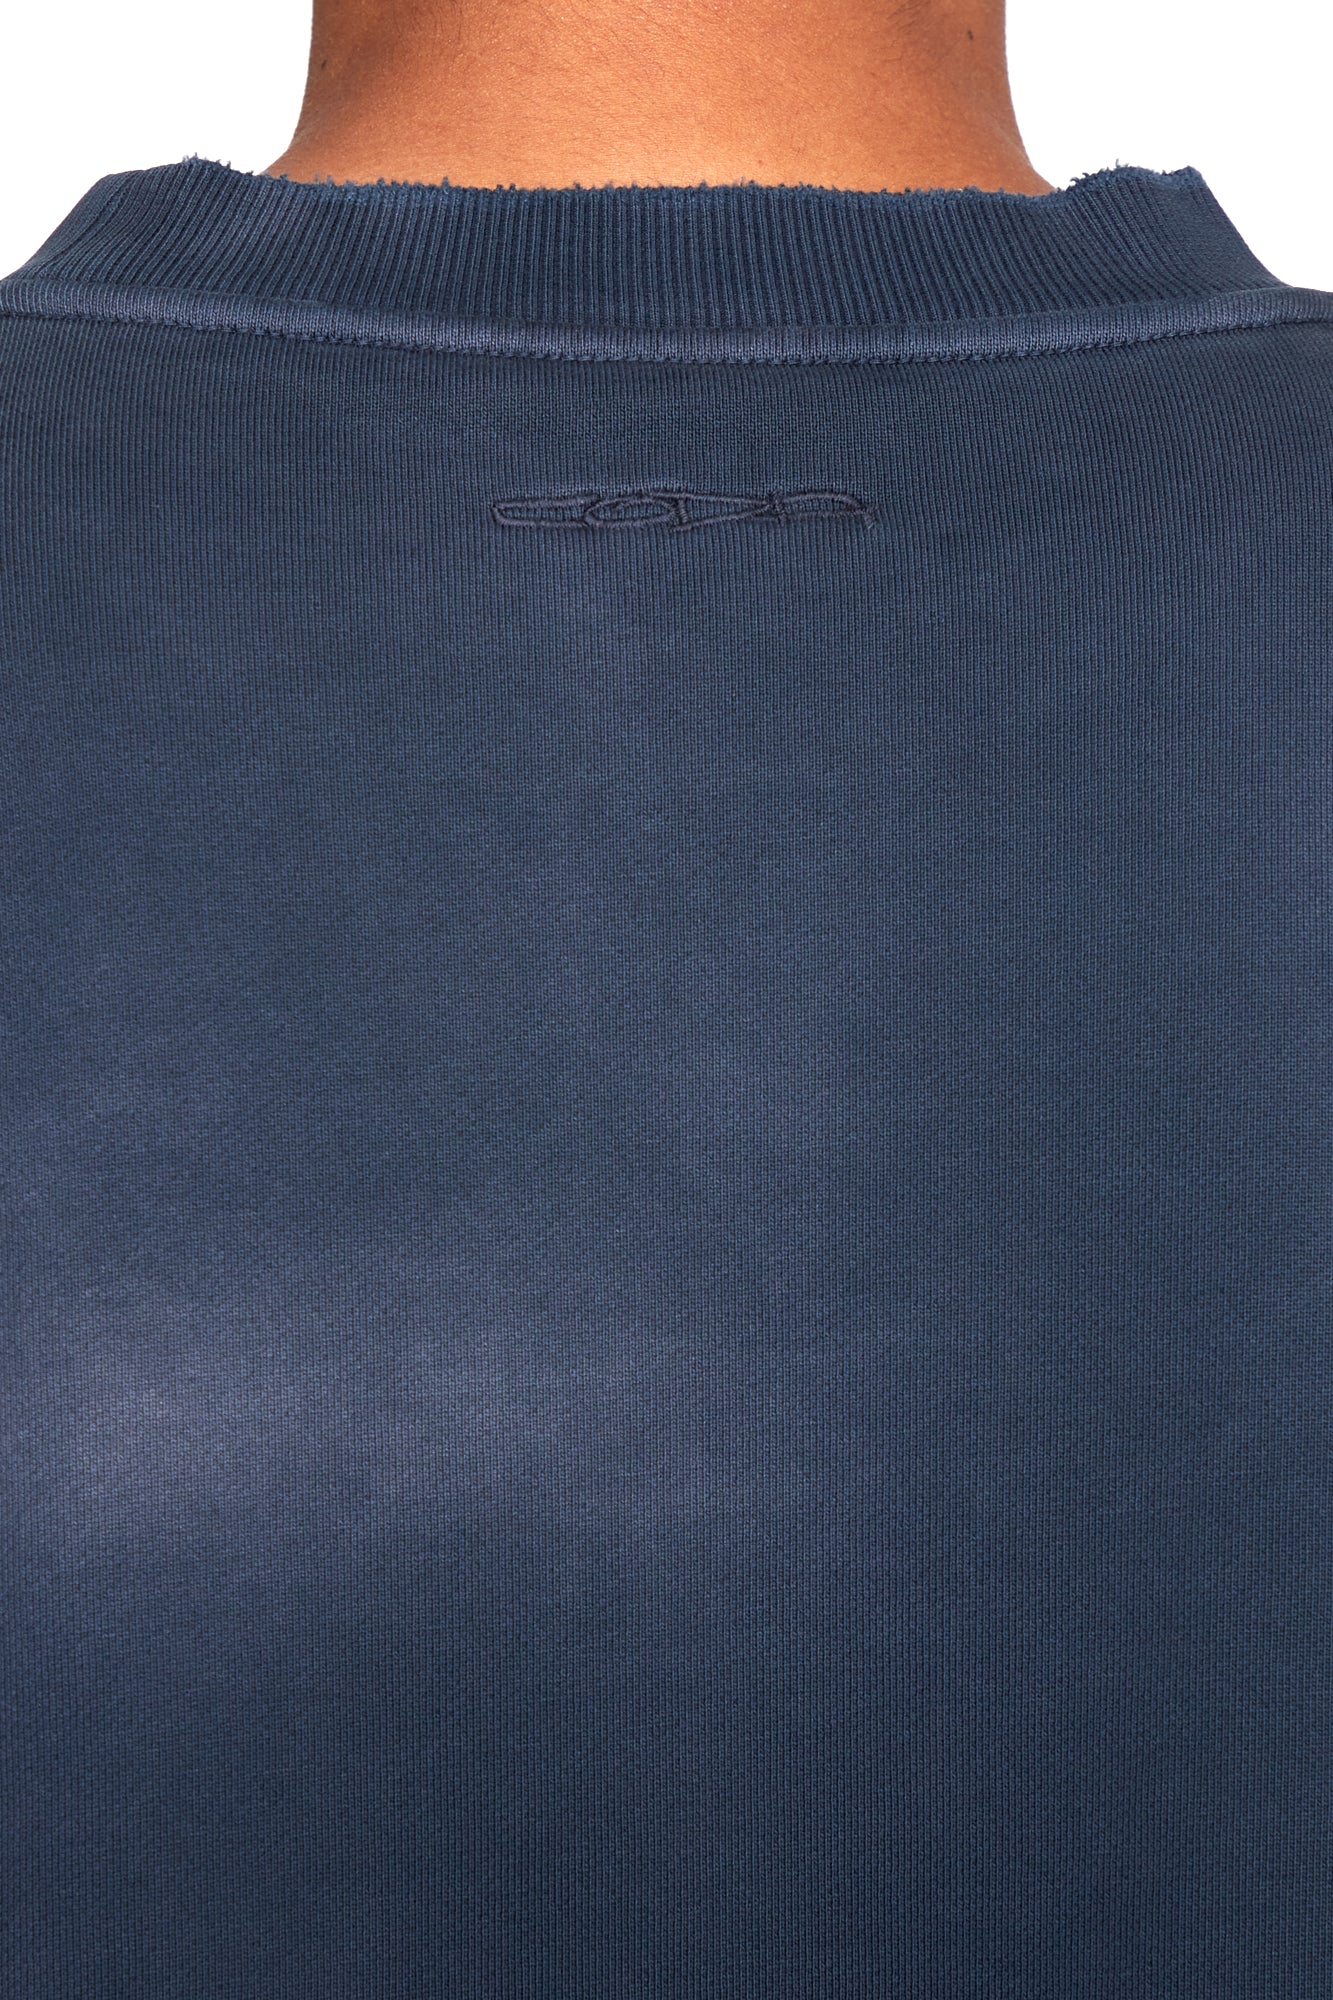 Load image into Gallery viewer, NAVY WASHED DISTRESSED AGING SWEATSHIRT
